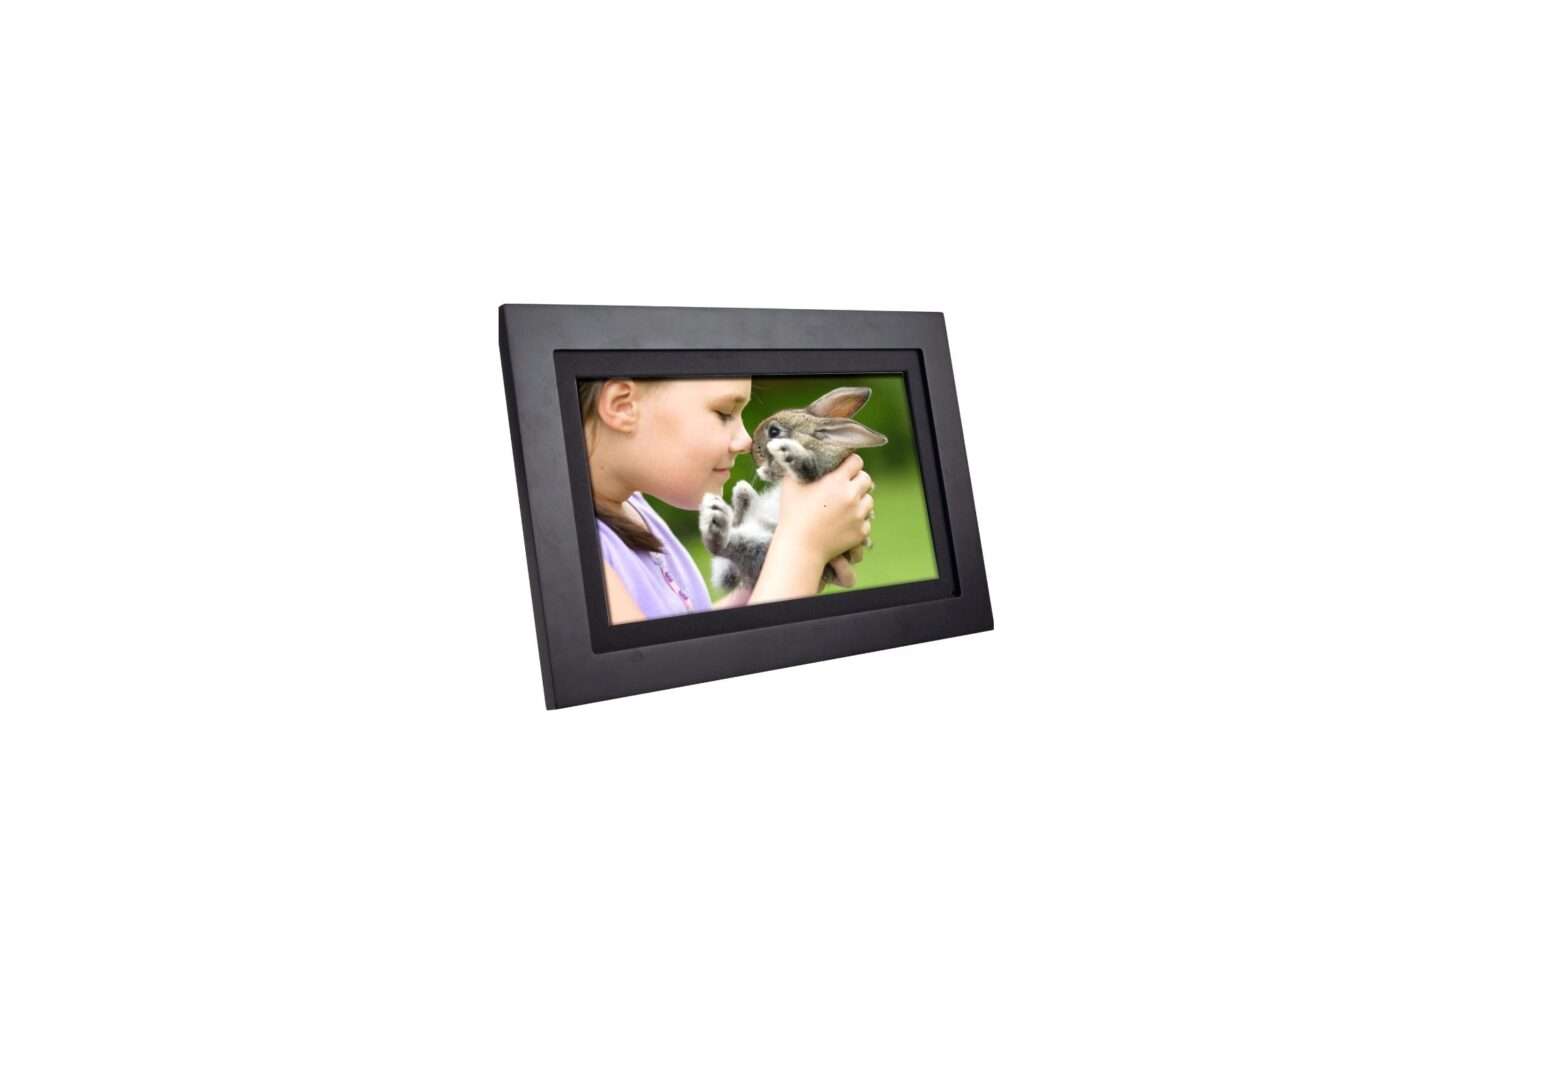 Simply Smart Home PhotoShare WiFi Digital Picture Frame User Manual